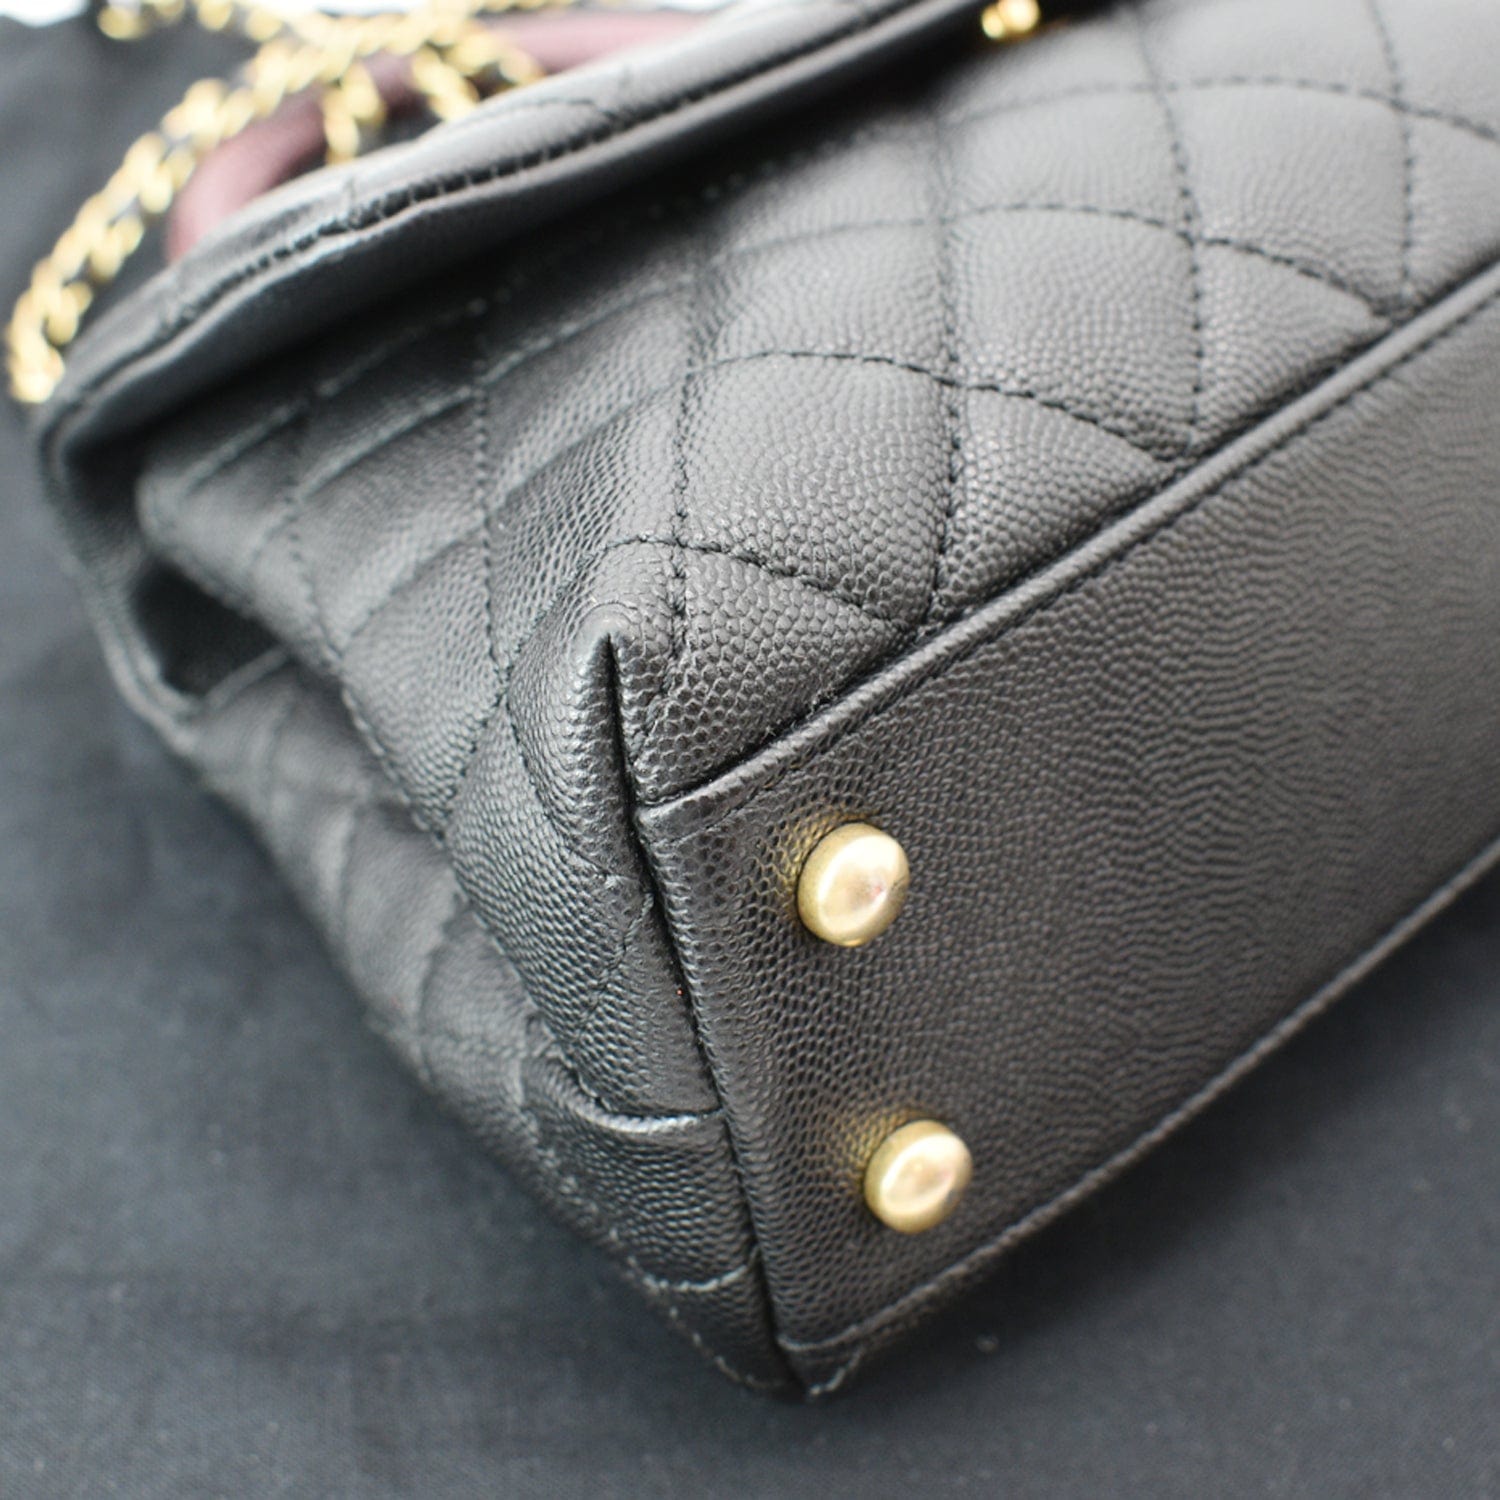 Chanel Mini/Small Coco Handle 22P Navy Quilted Caviar with Lizard Embossed  Top Handle Light gold hardware